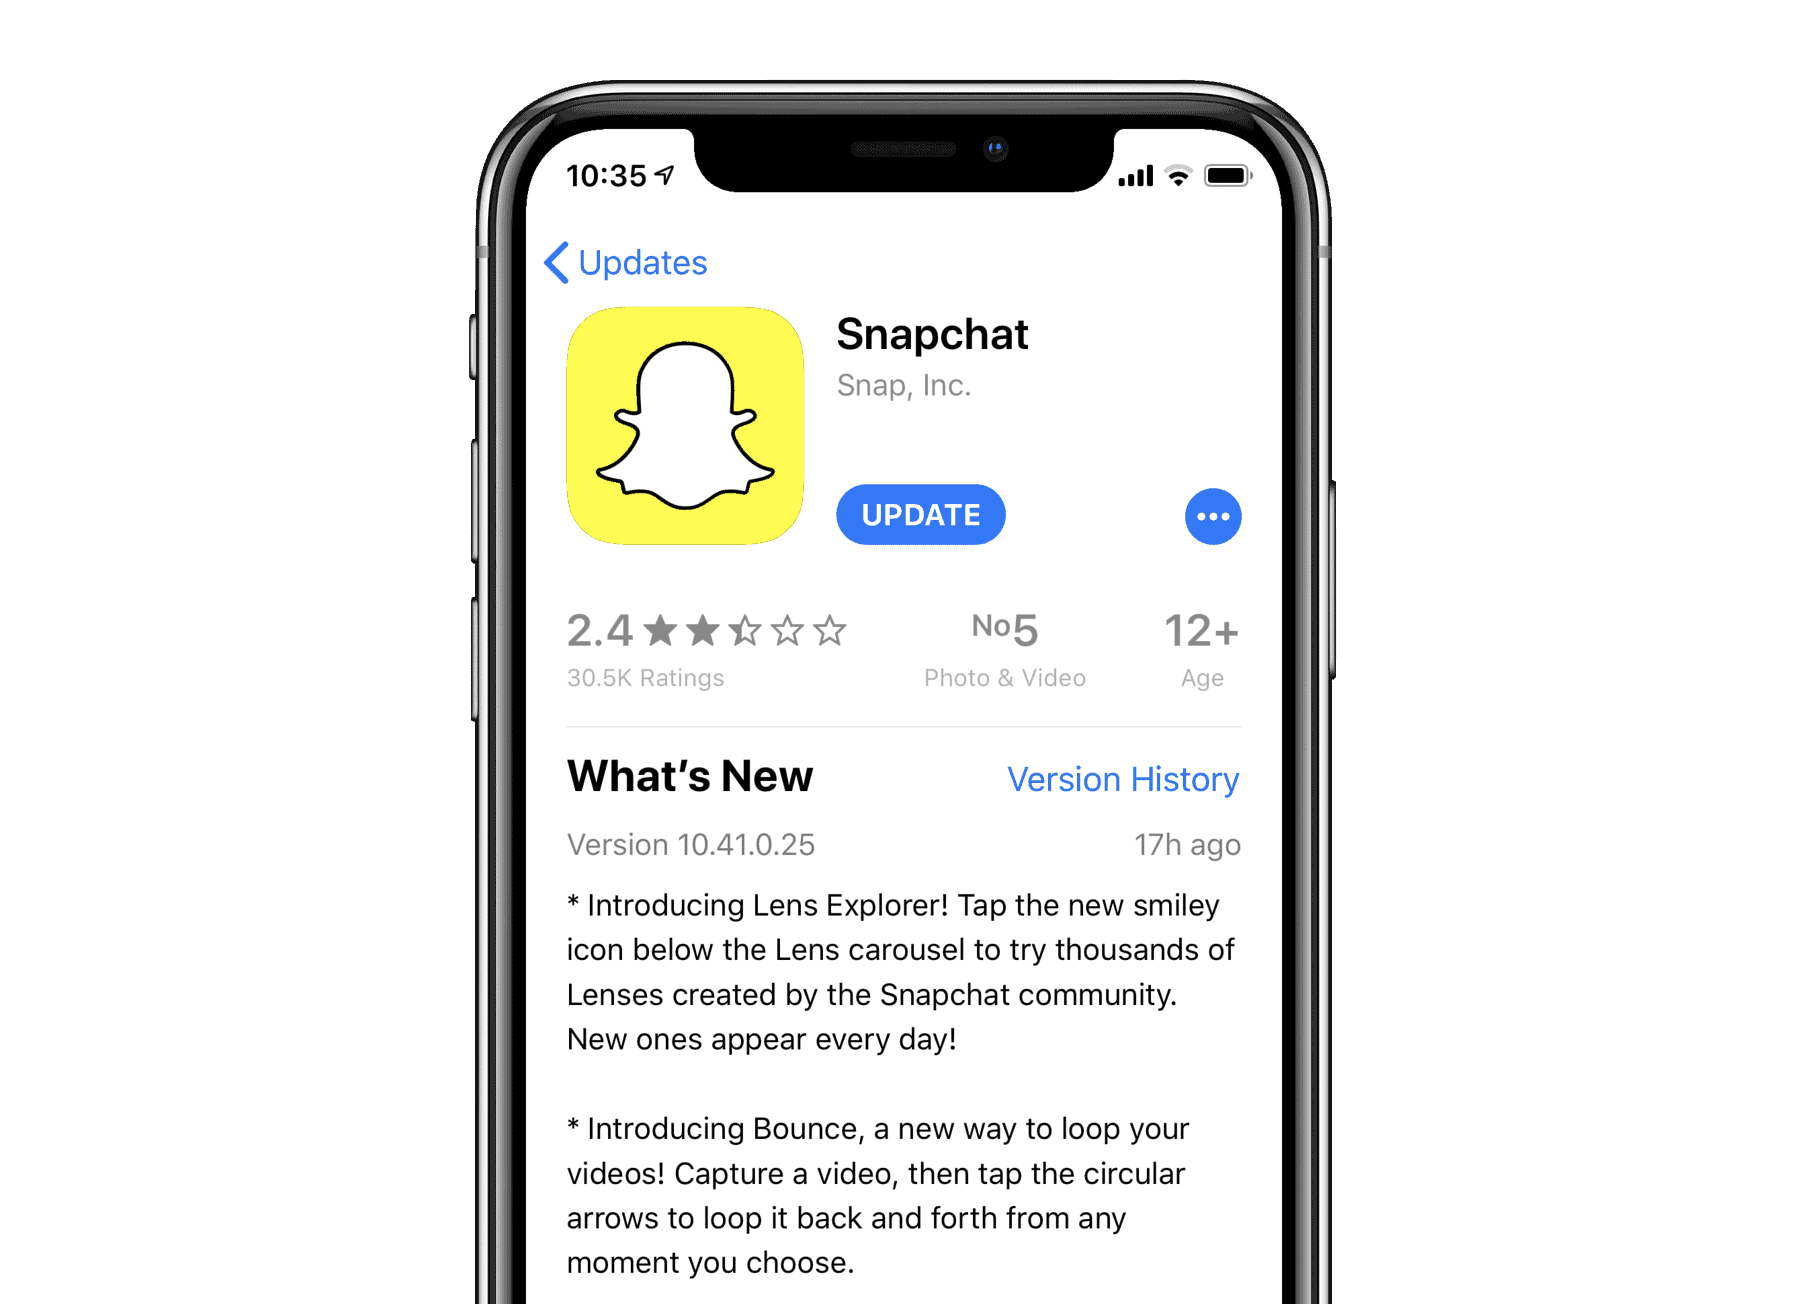 Snapchat app updated with two new features: Lens Explorer and Bounce